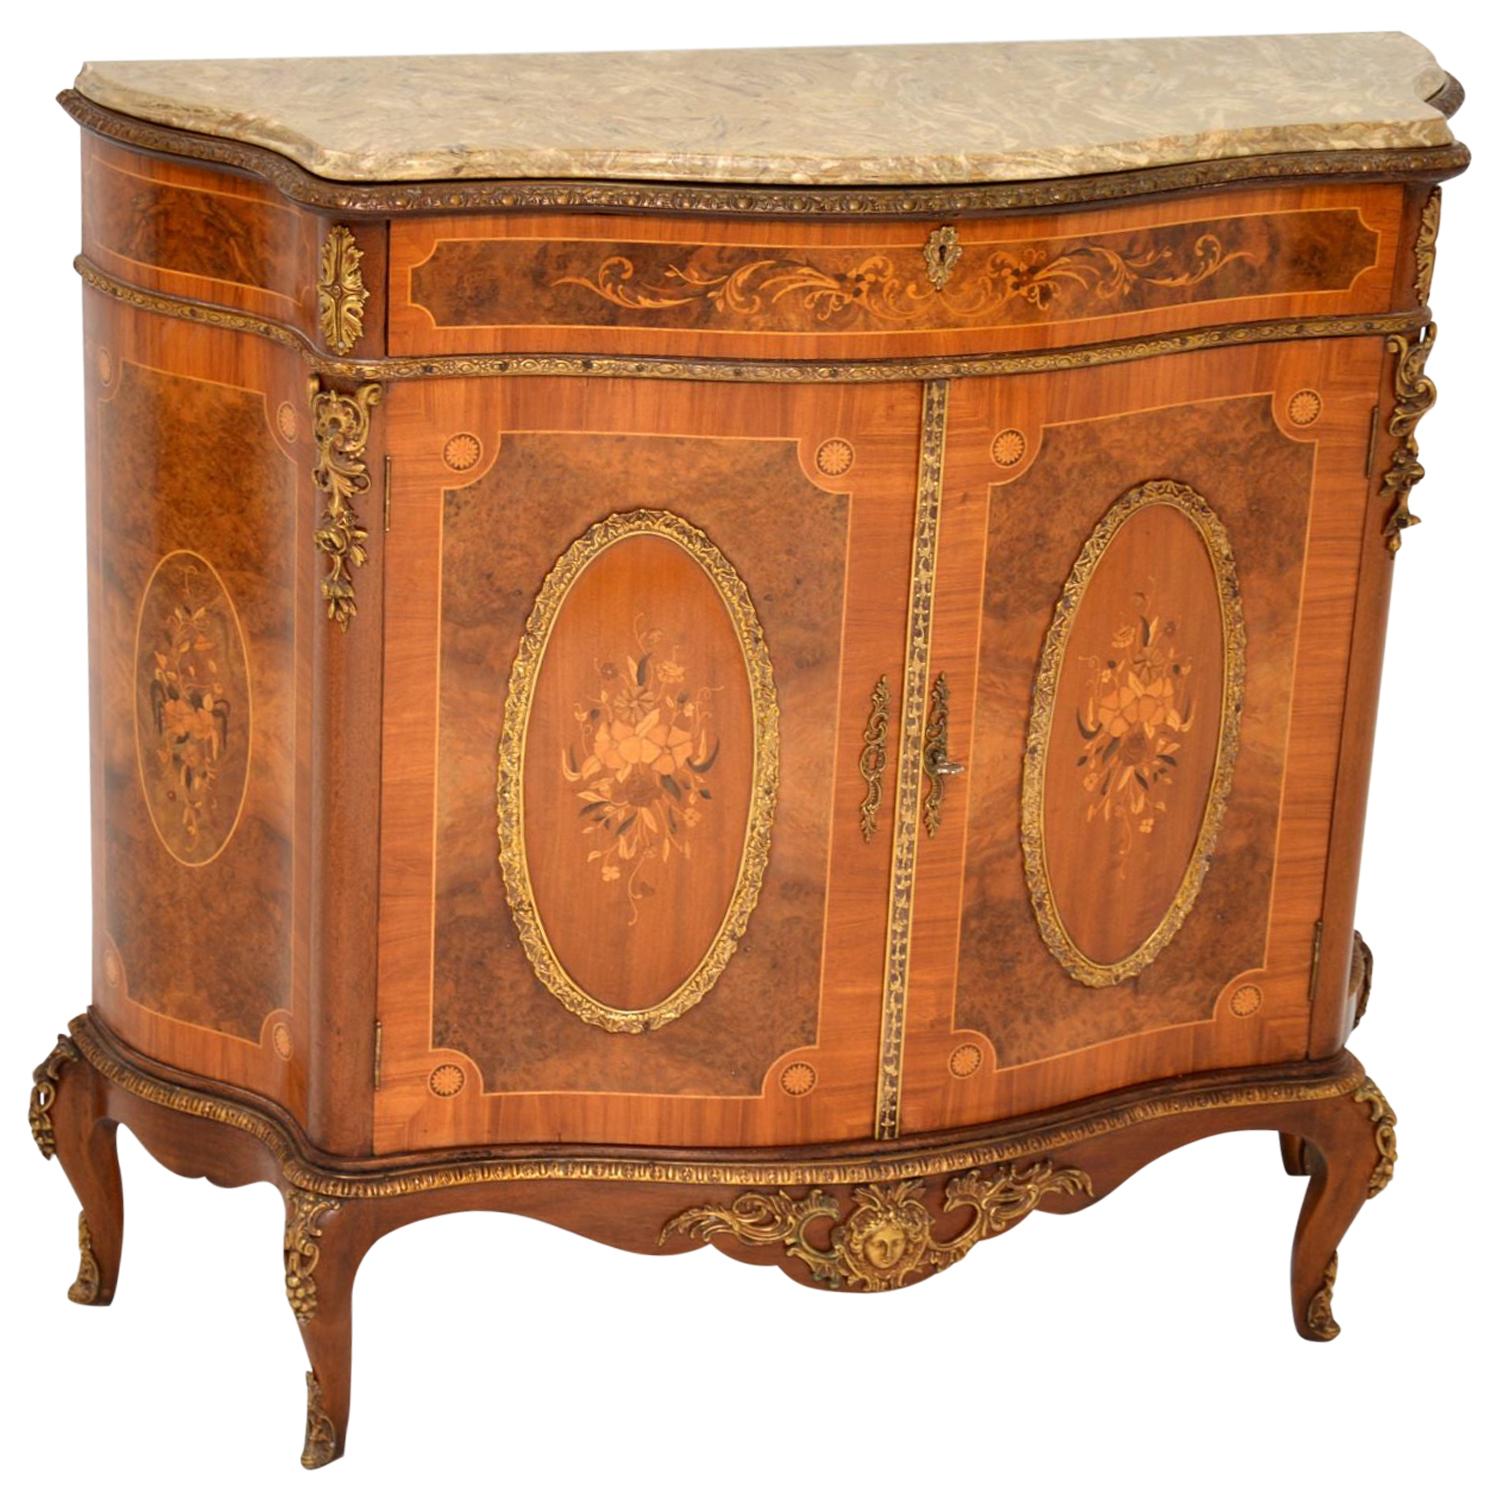 Antique French Inlaid Marble-Top Cabinet